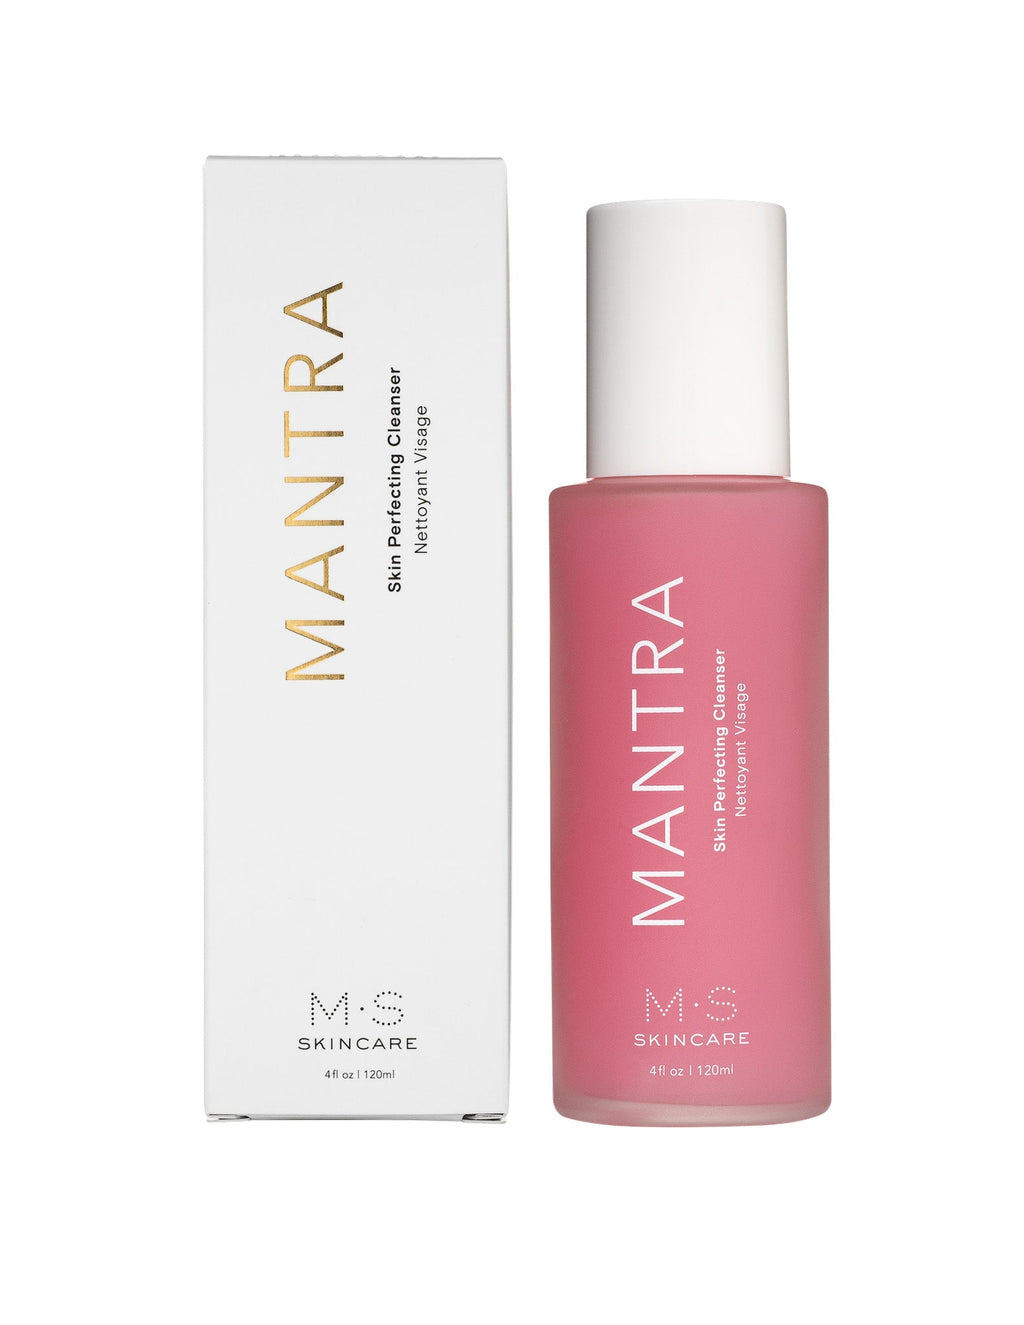 MANTRA Skin Perfecting Cleanser